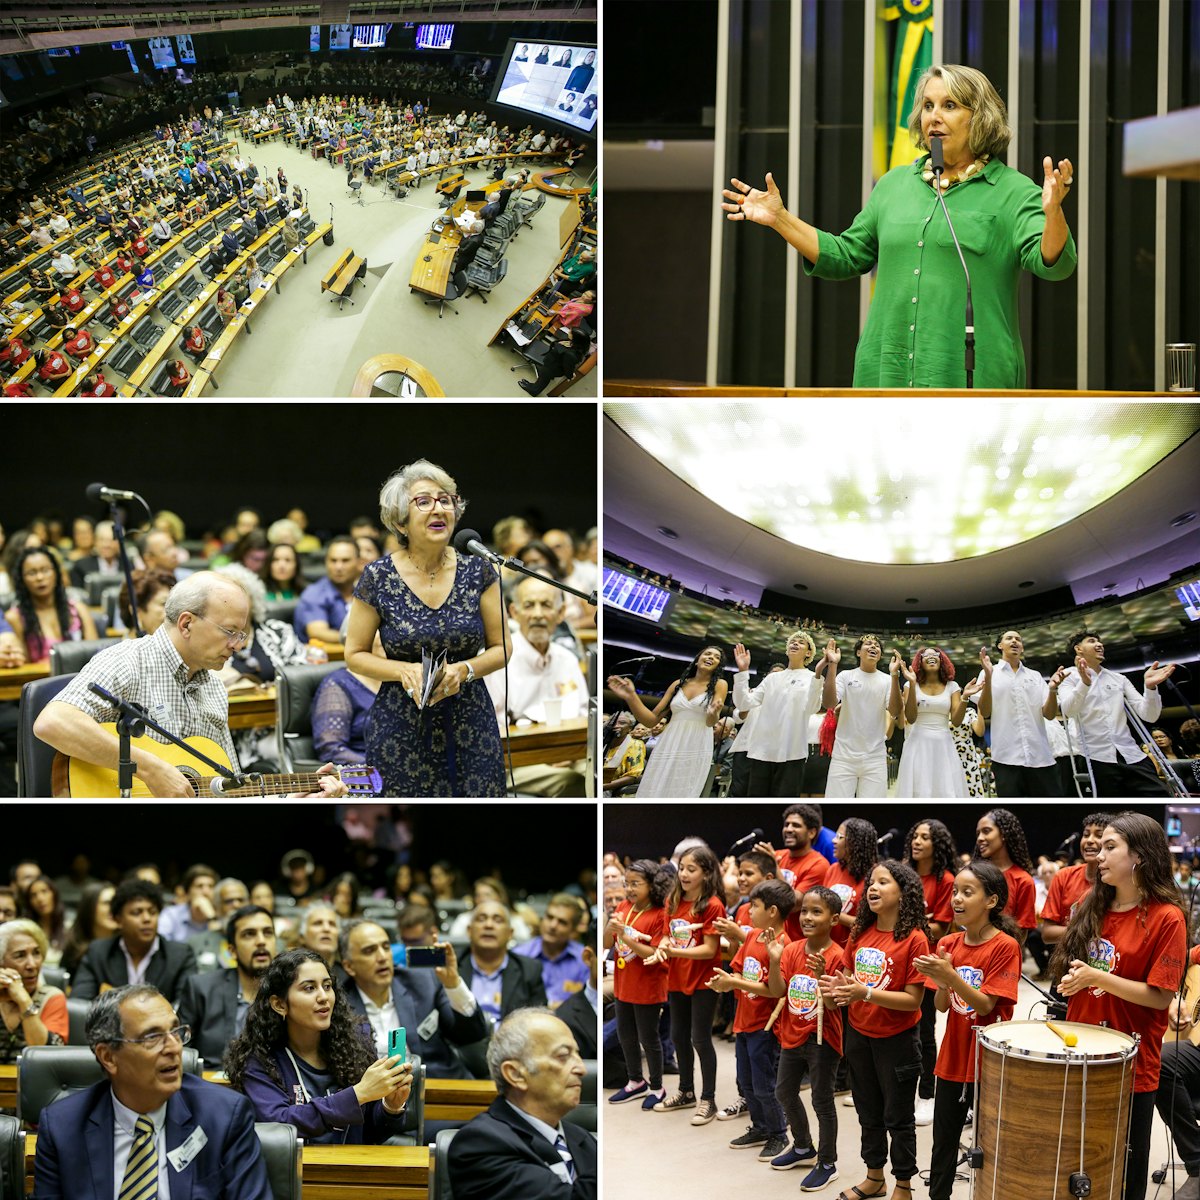 In Brazil, the Chamber of Deputies of the National Congress of Brazil marked the centenary of efforts by the Bahá’í community in that country. Deputy Érika Kokay (top-right) spoke movingly about the potential of the Bahá’í teachings to inspire greater unity:      “In this Chamber, which has often experienced antagonistic moments, we can listen today to the symphony of peace presented by the Bahá’í community. The Bahá’í teachings remind us daily that humanity is one. This is a song of great courage and the counterpoint to all fears—faith in the ‘other,’ faith in the possibility that all people can live harmoniously.”